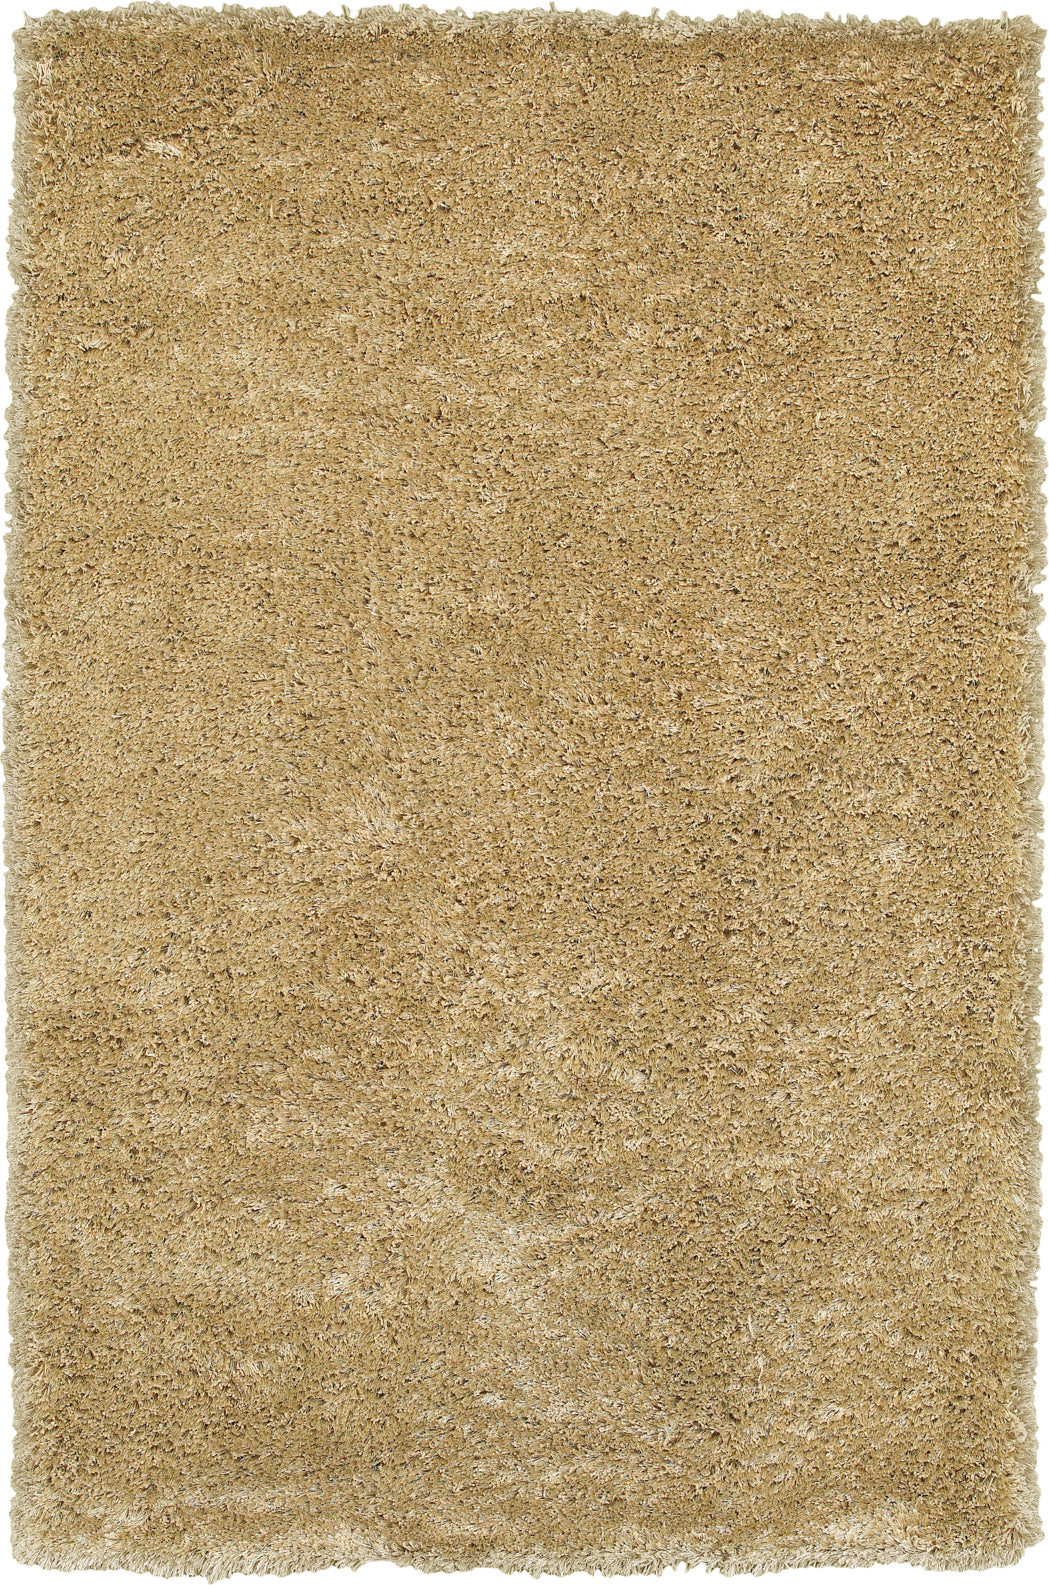 LR Resources Serenity 19010 Oatmeal Area Rug main image